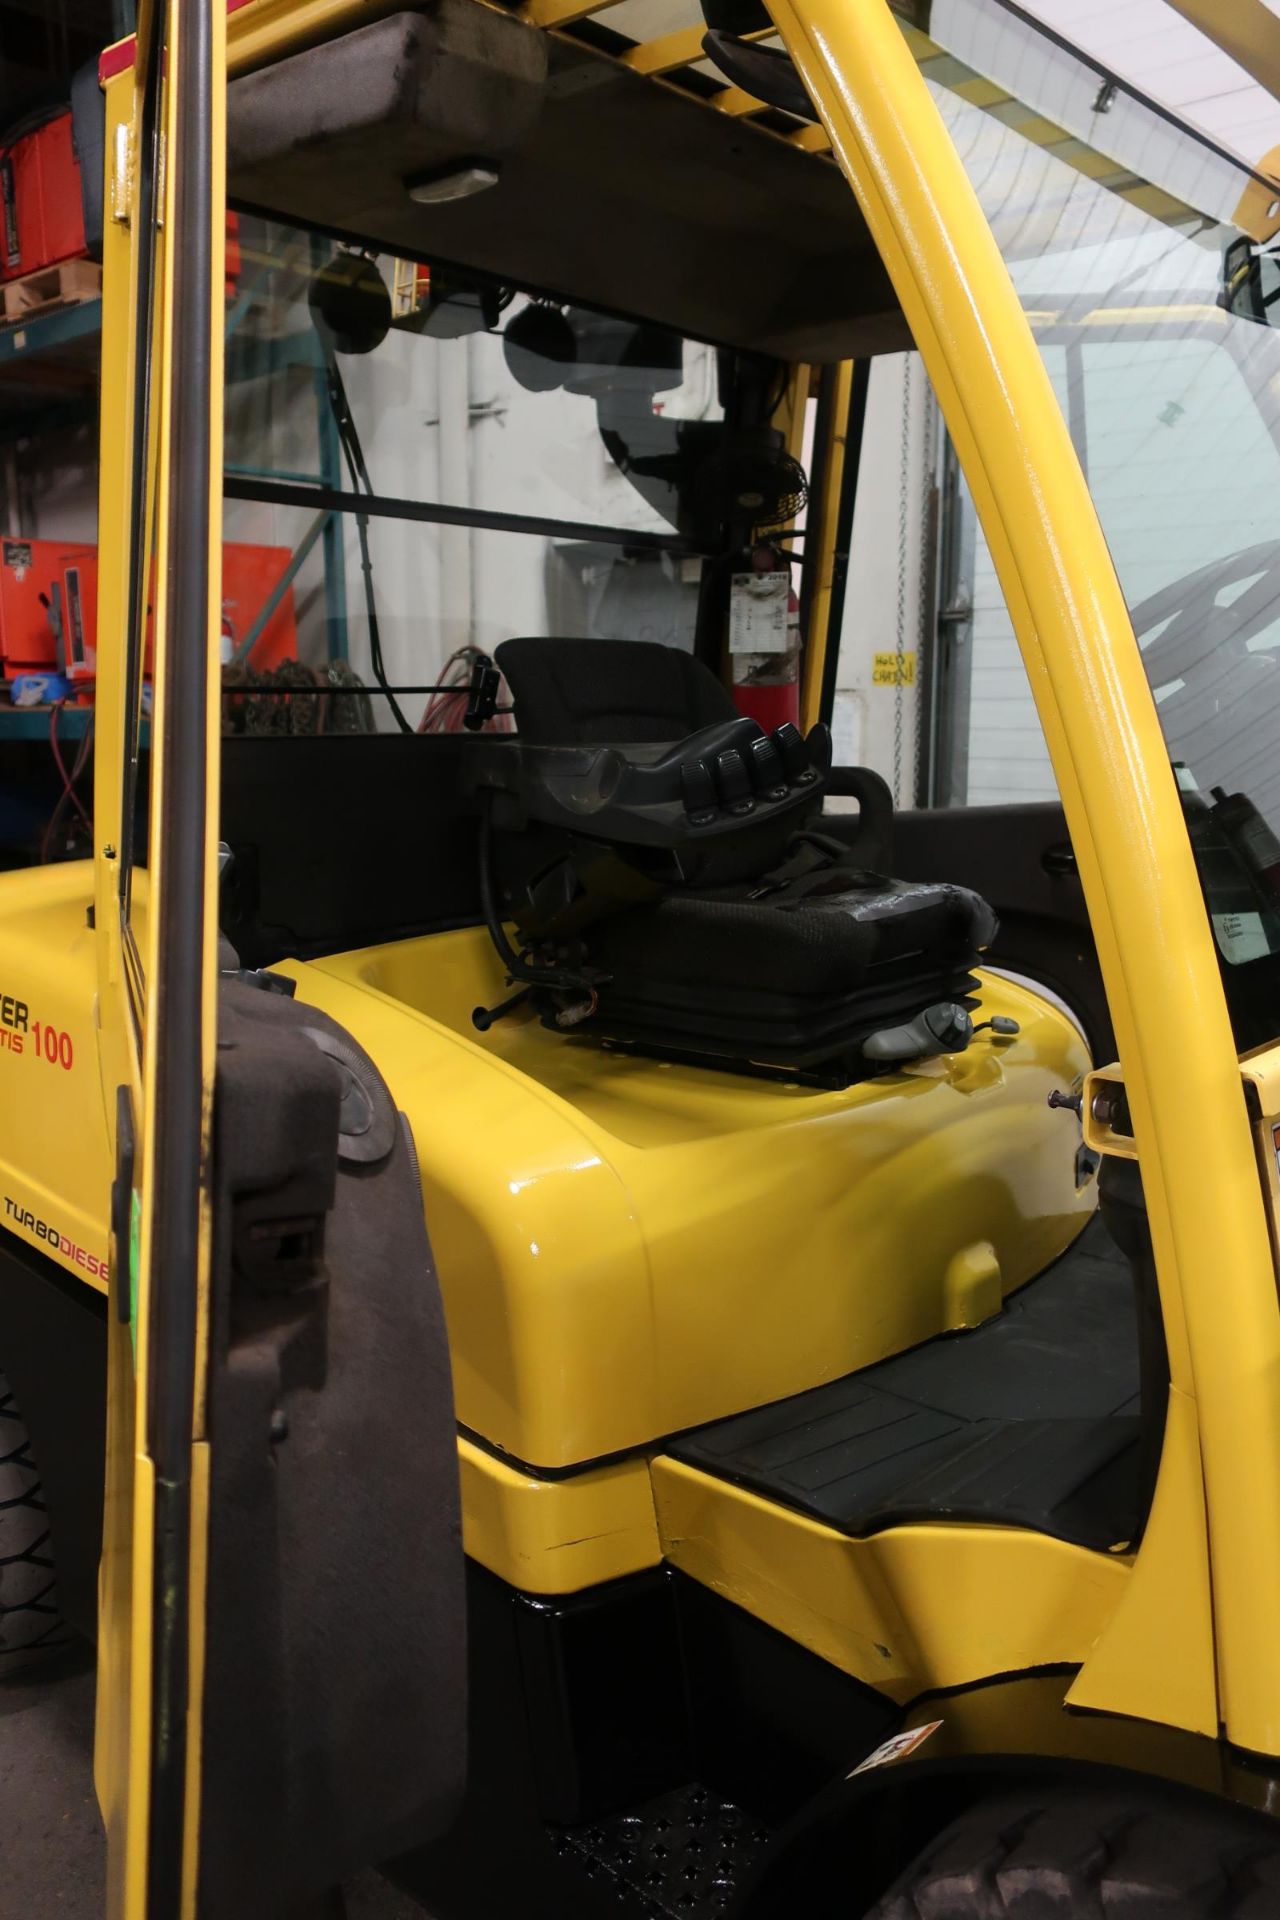 FREE CUSTOMS - 2014 Hyster 10000lbs Capacity OUTDOOR Forklift with 72" forks and fork positioners - Image 3 of 3